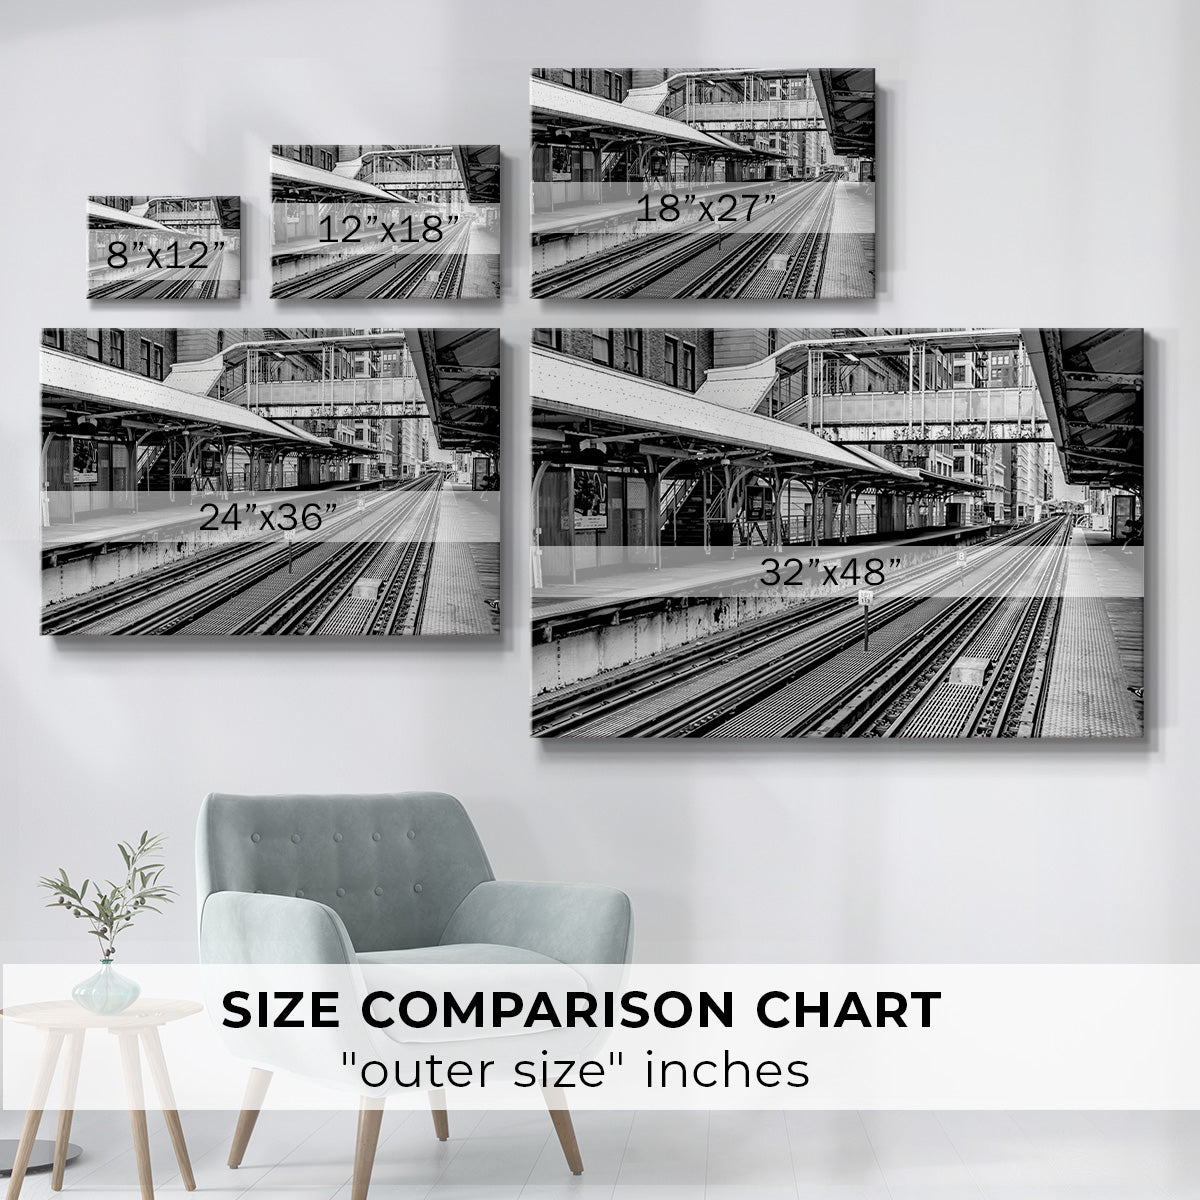 Vintage Chicago L  - Gallery Wrapped Canvas